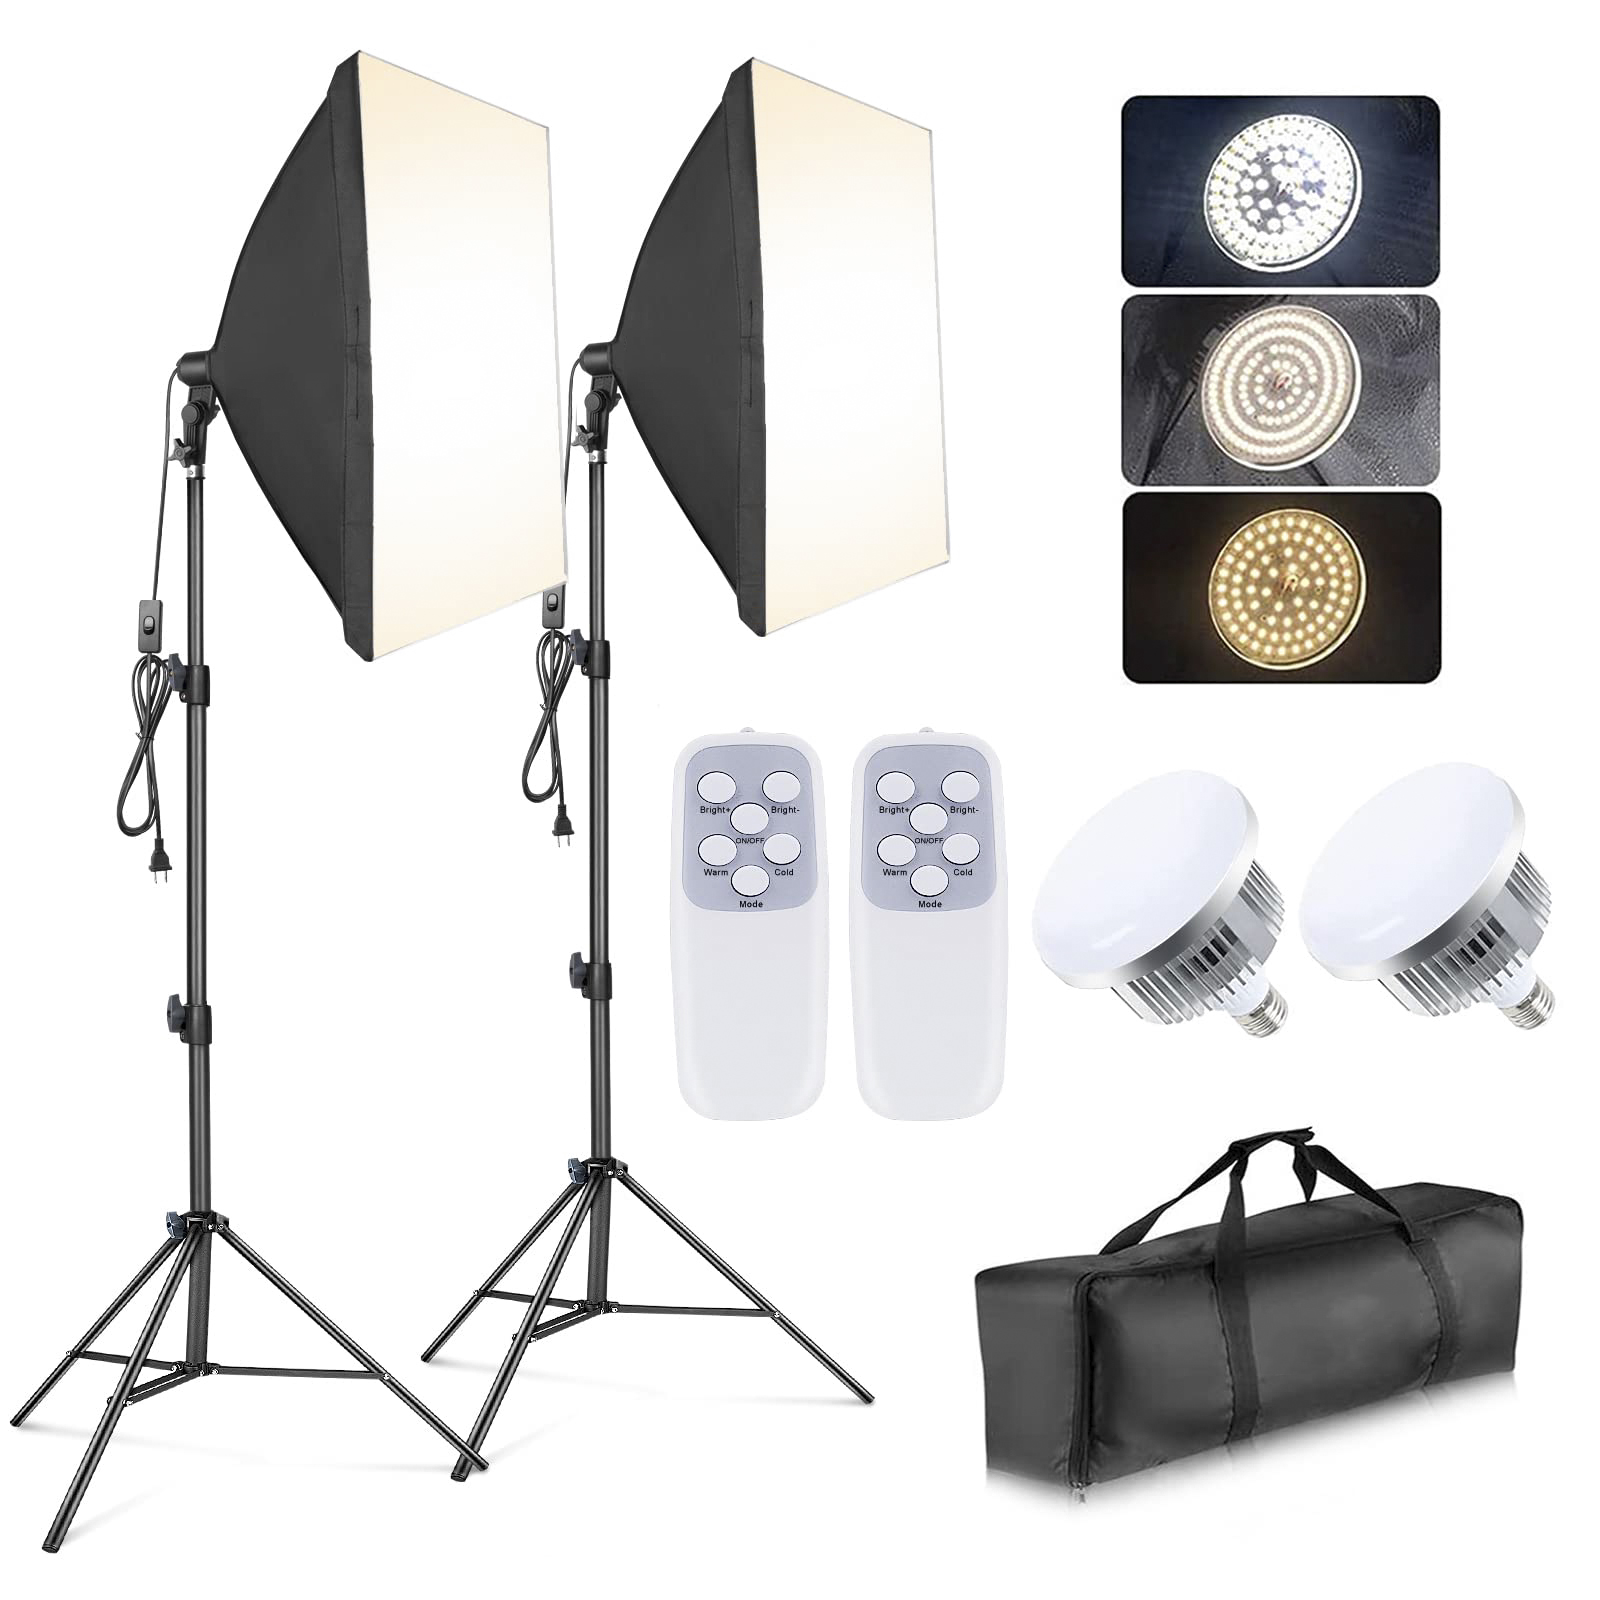 Softbox Photography Lighting Kit, Professional Photo Studio Lighting with 2x27x27in Soft Box | 2X 85W 3000-7500K E26 LED Bulb,Continuous Lighting Kit for Video Recording (ST-10877)-OXIMETERBUY